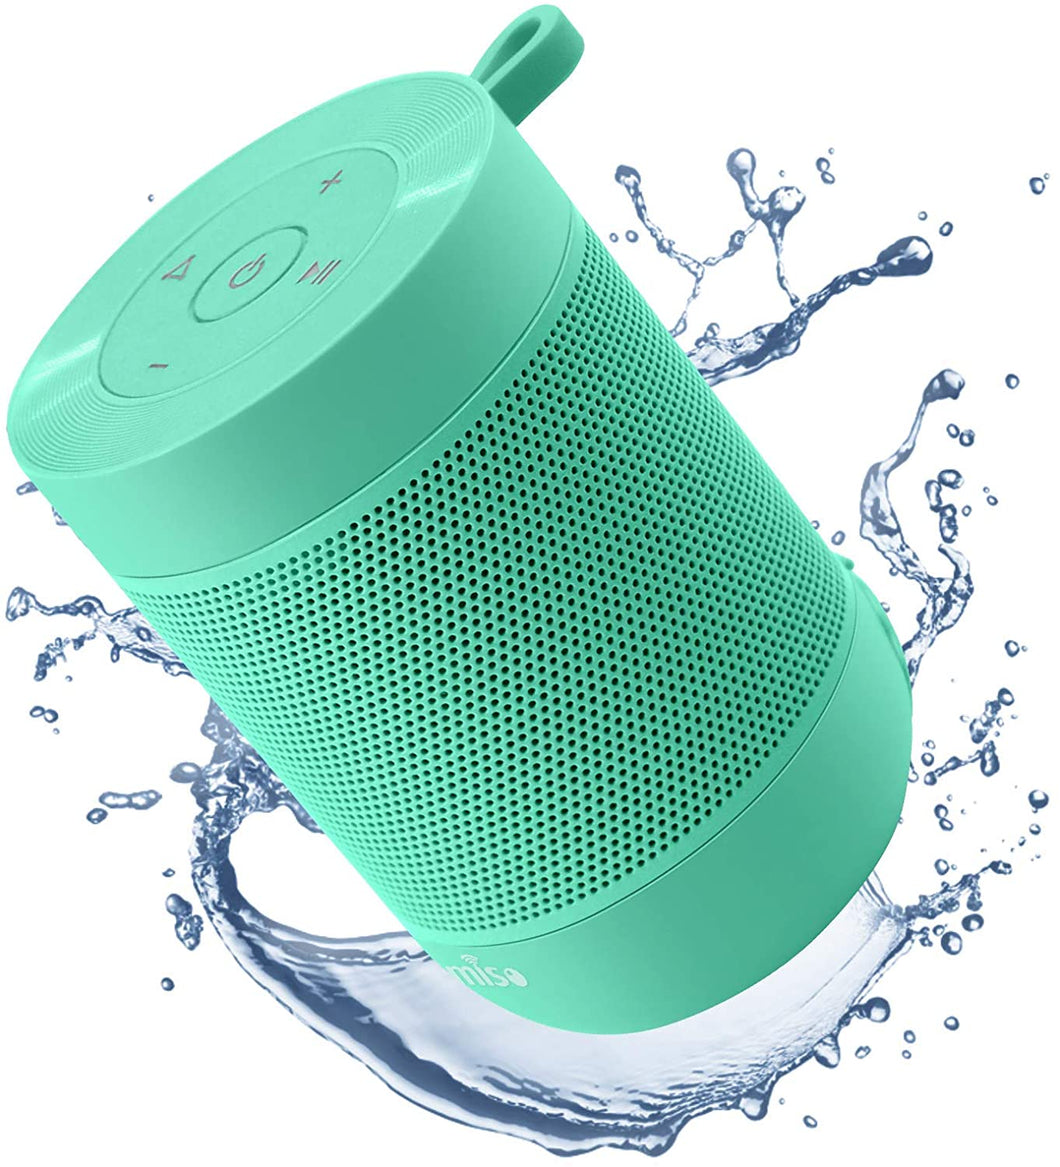 Portable Bluetooth Speaker, COMISO Bluetooth Wireless Mini Pocket Speaker, 360 HD Surround Sound & Rich Stereo Bass, 12H Playtime, IPX5 Waterproof for Travel, Outdoors, Home and Party (Mint)